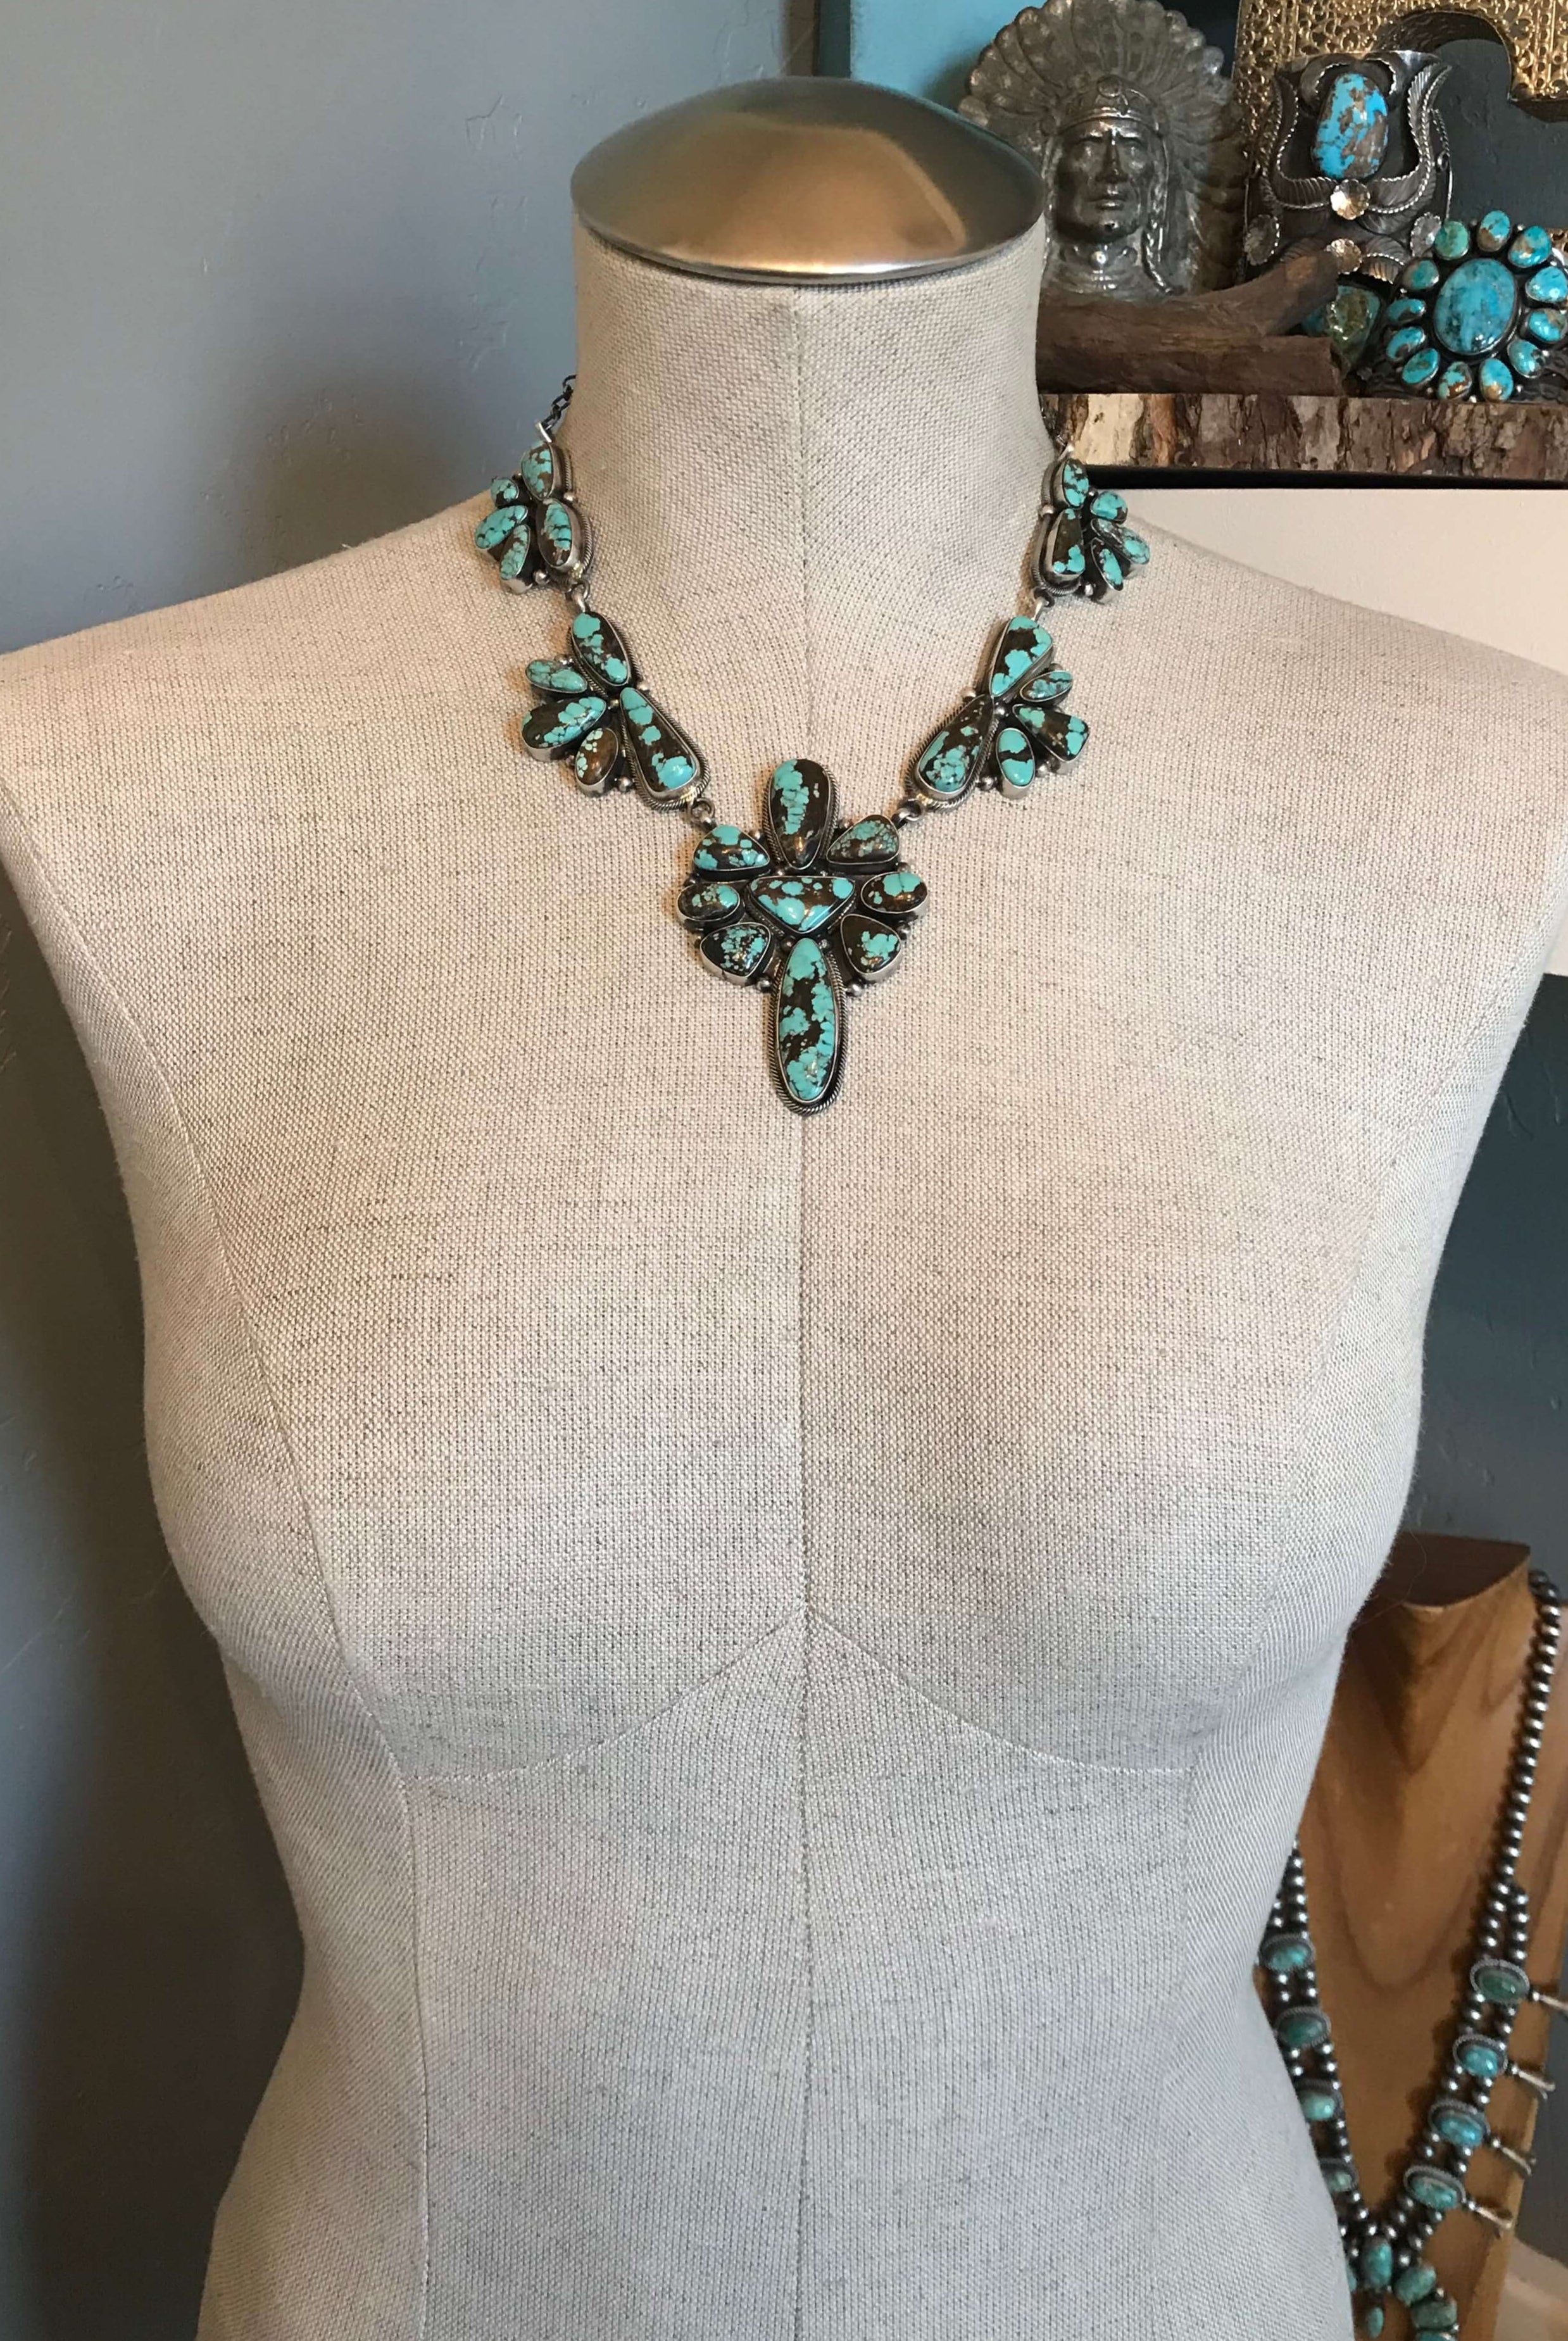 The Pondosa Statement Necklace Set-Necklaces-Calli Co., Turquoise and Silver Jewelry, Native American Handmade, Zuni Tribe, Navajo Tribe, Brock Texas